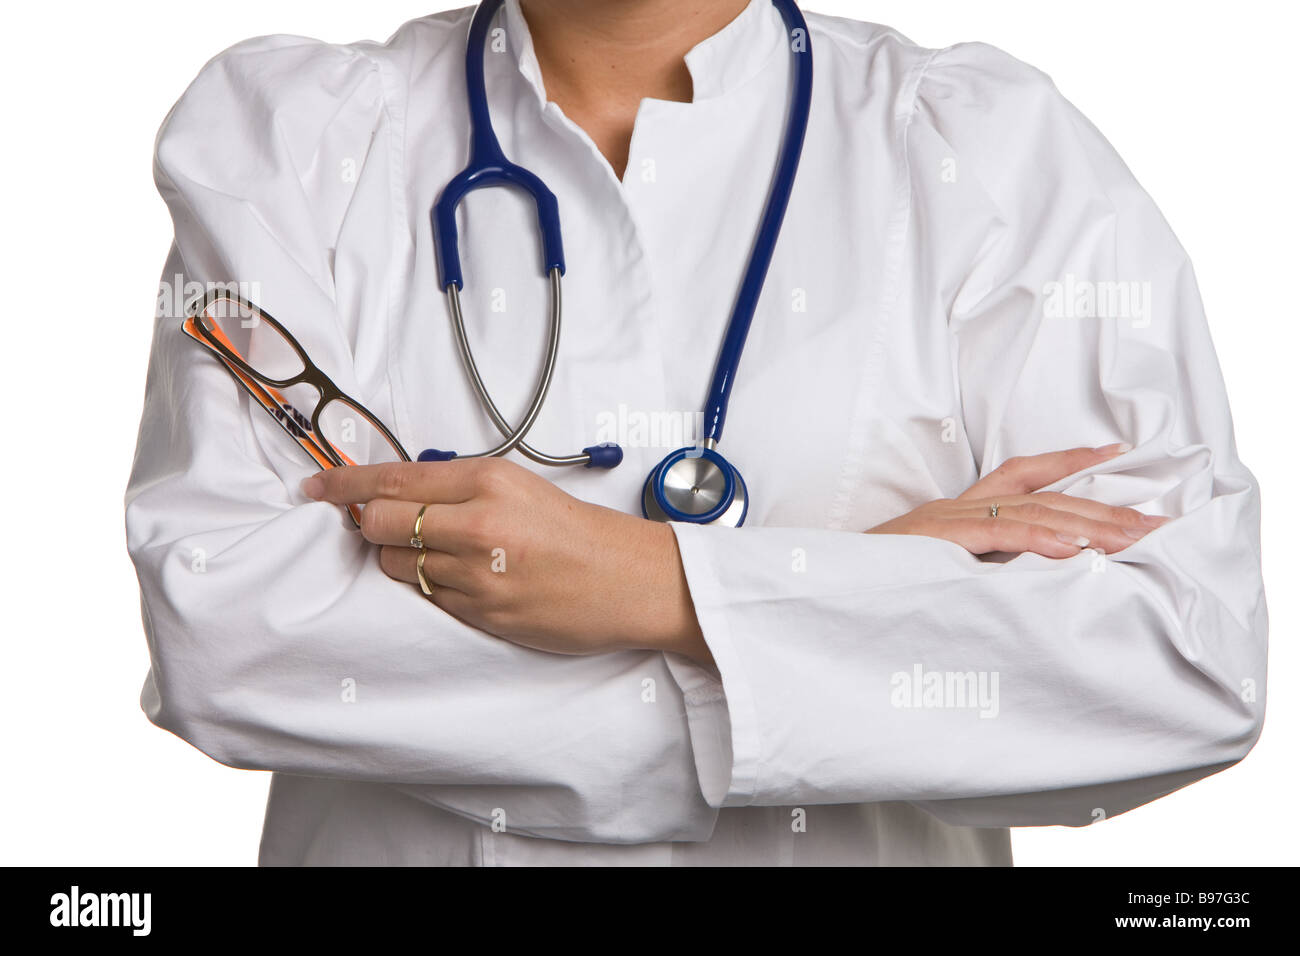 Young female doctor Stock Photo